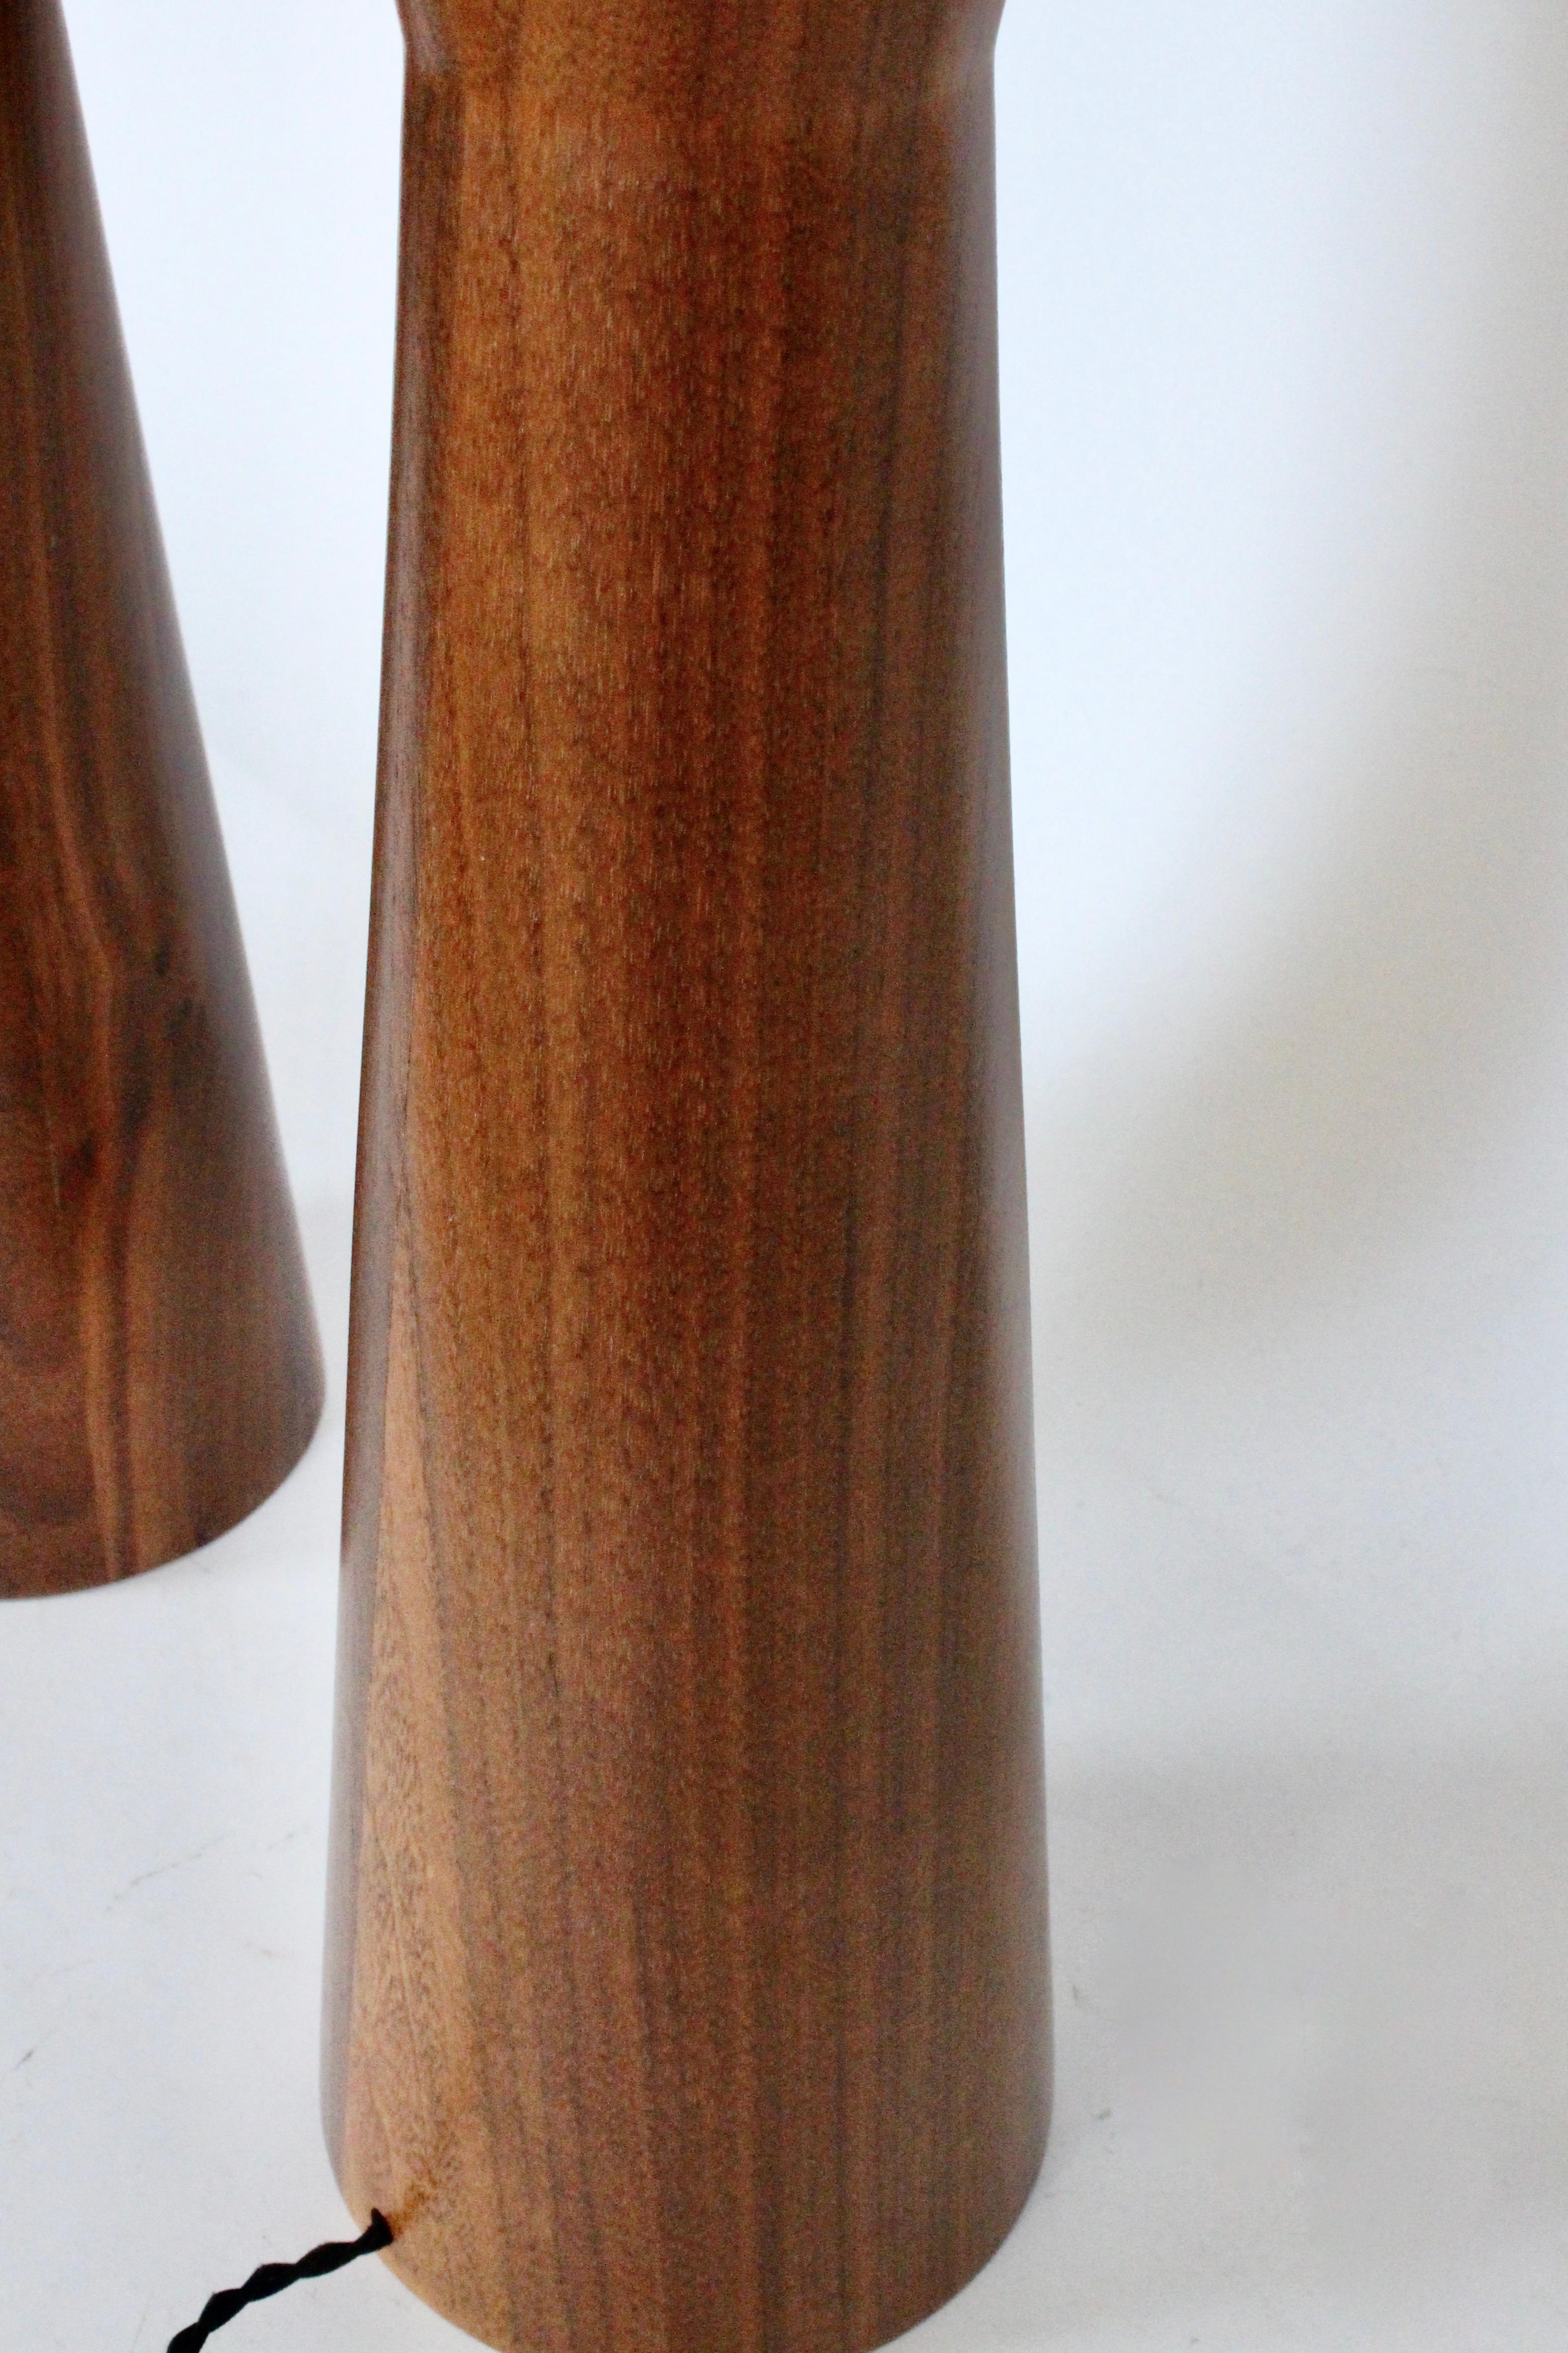 Pair of Raymond Pfennig for Zina Walnut Hourglass Table Lamps, 1960s For Sale 1